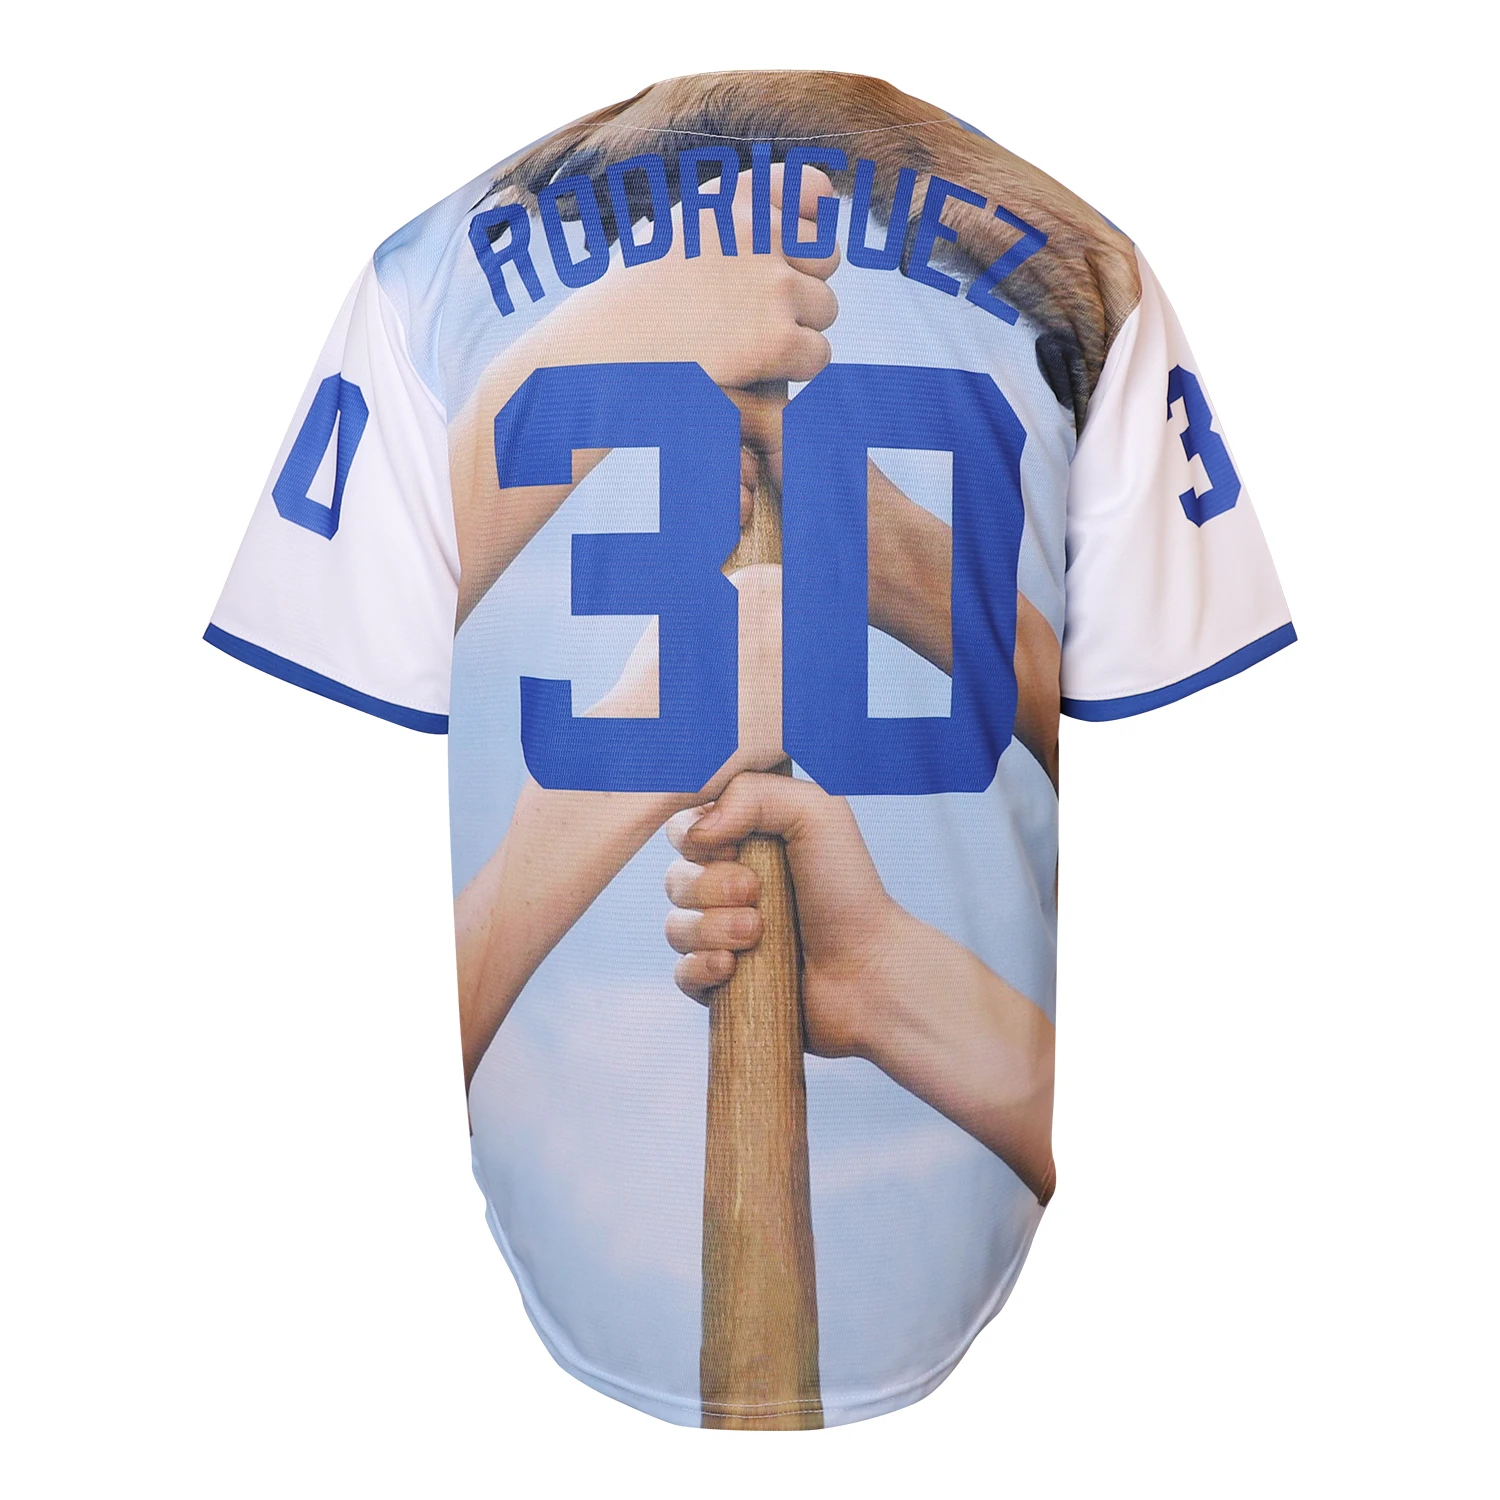 Wholesale The Sandlot Legends #30 Benny The Jet Rodriguez 3D Printed  Fashion Movie Baseball Jersey From m.